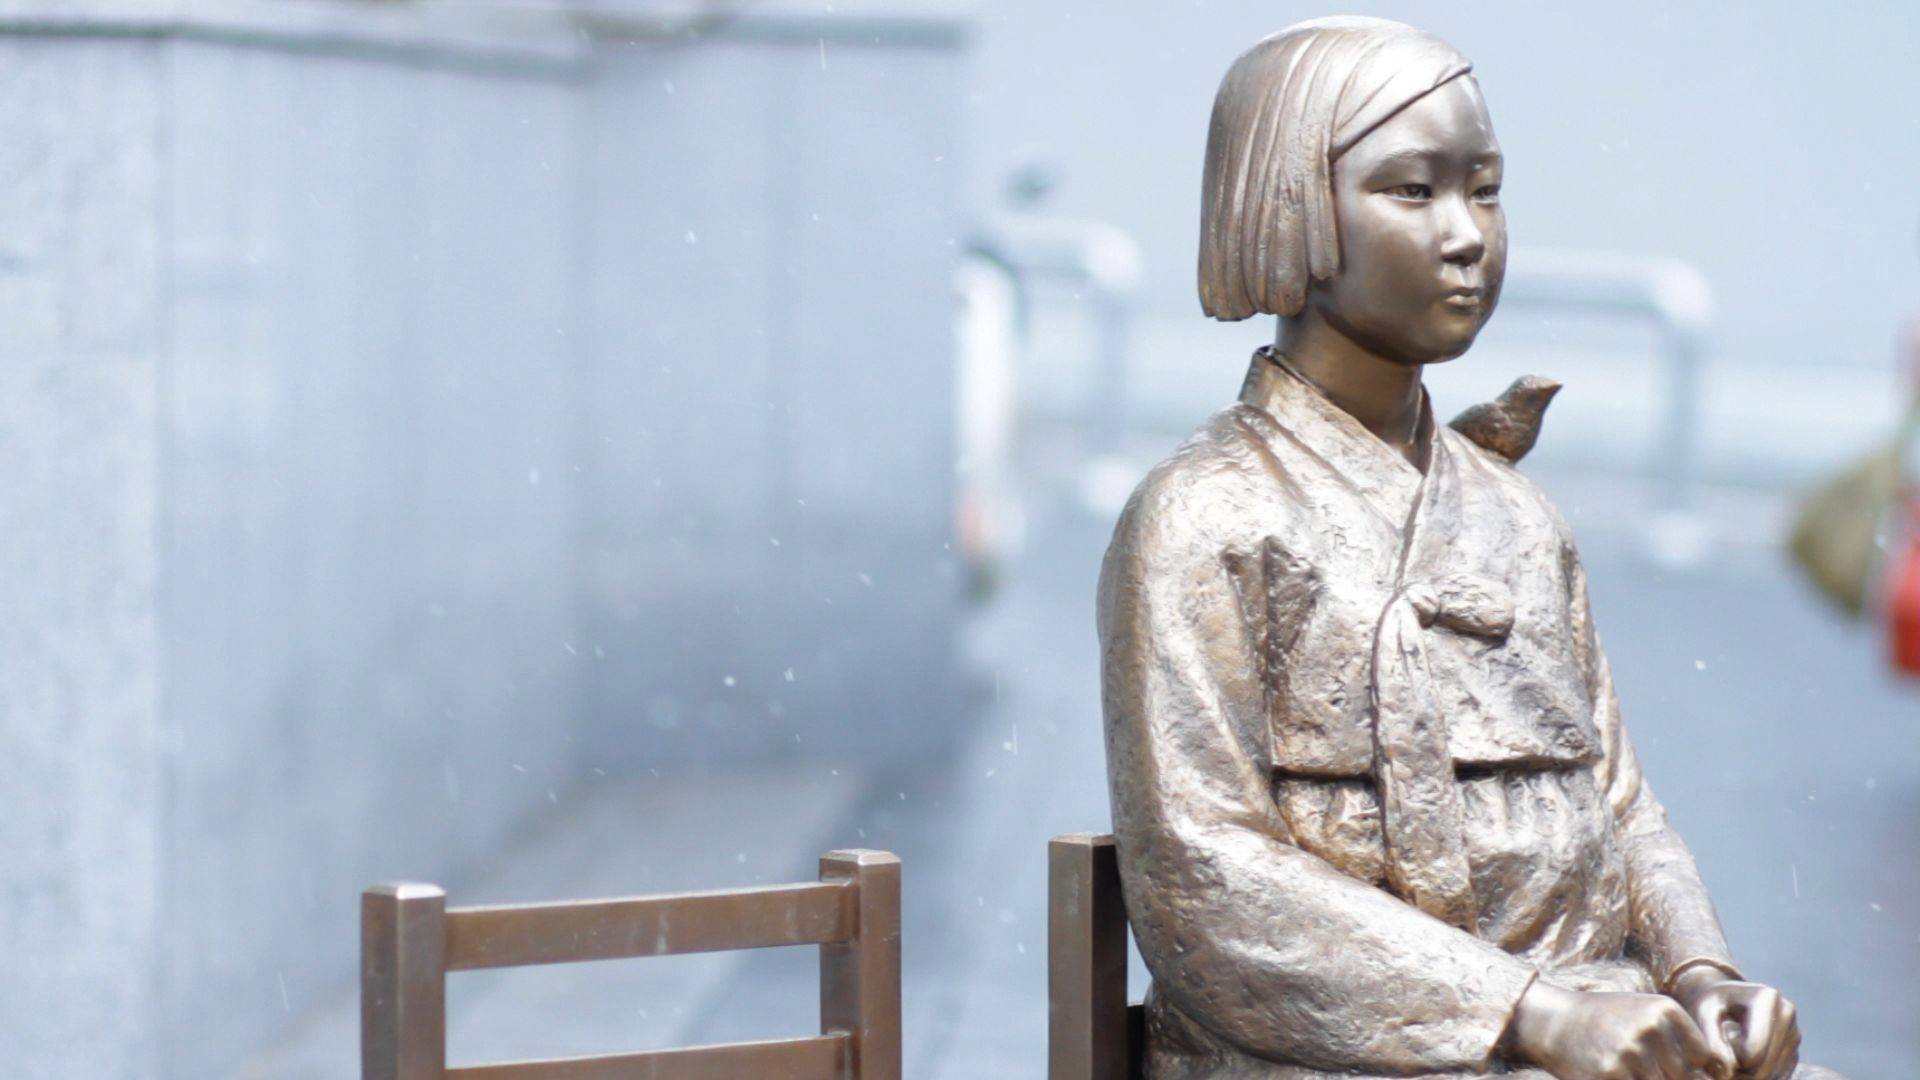 A statue of a Korean girl sitting in a chair with a bird on her shoulder, also known as the Statue of Peace